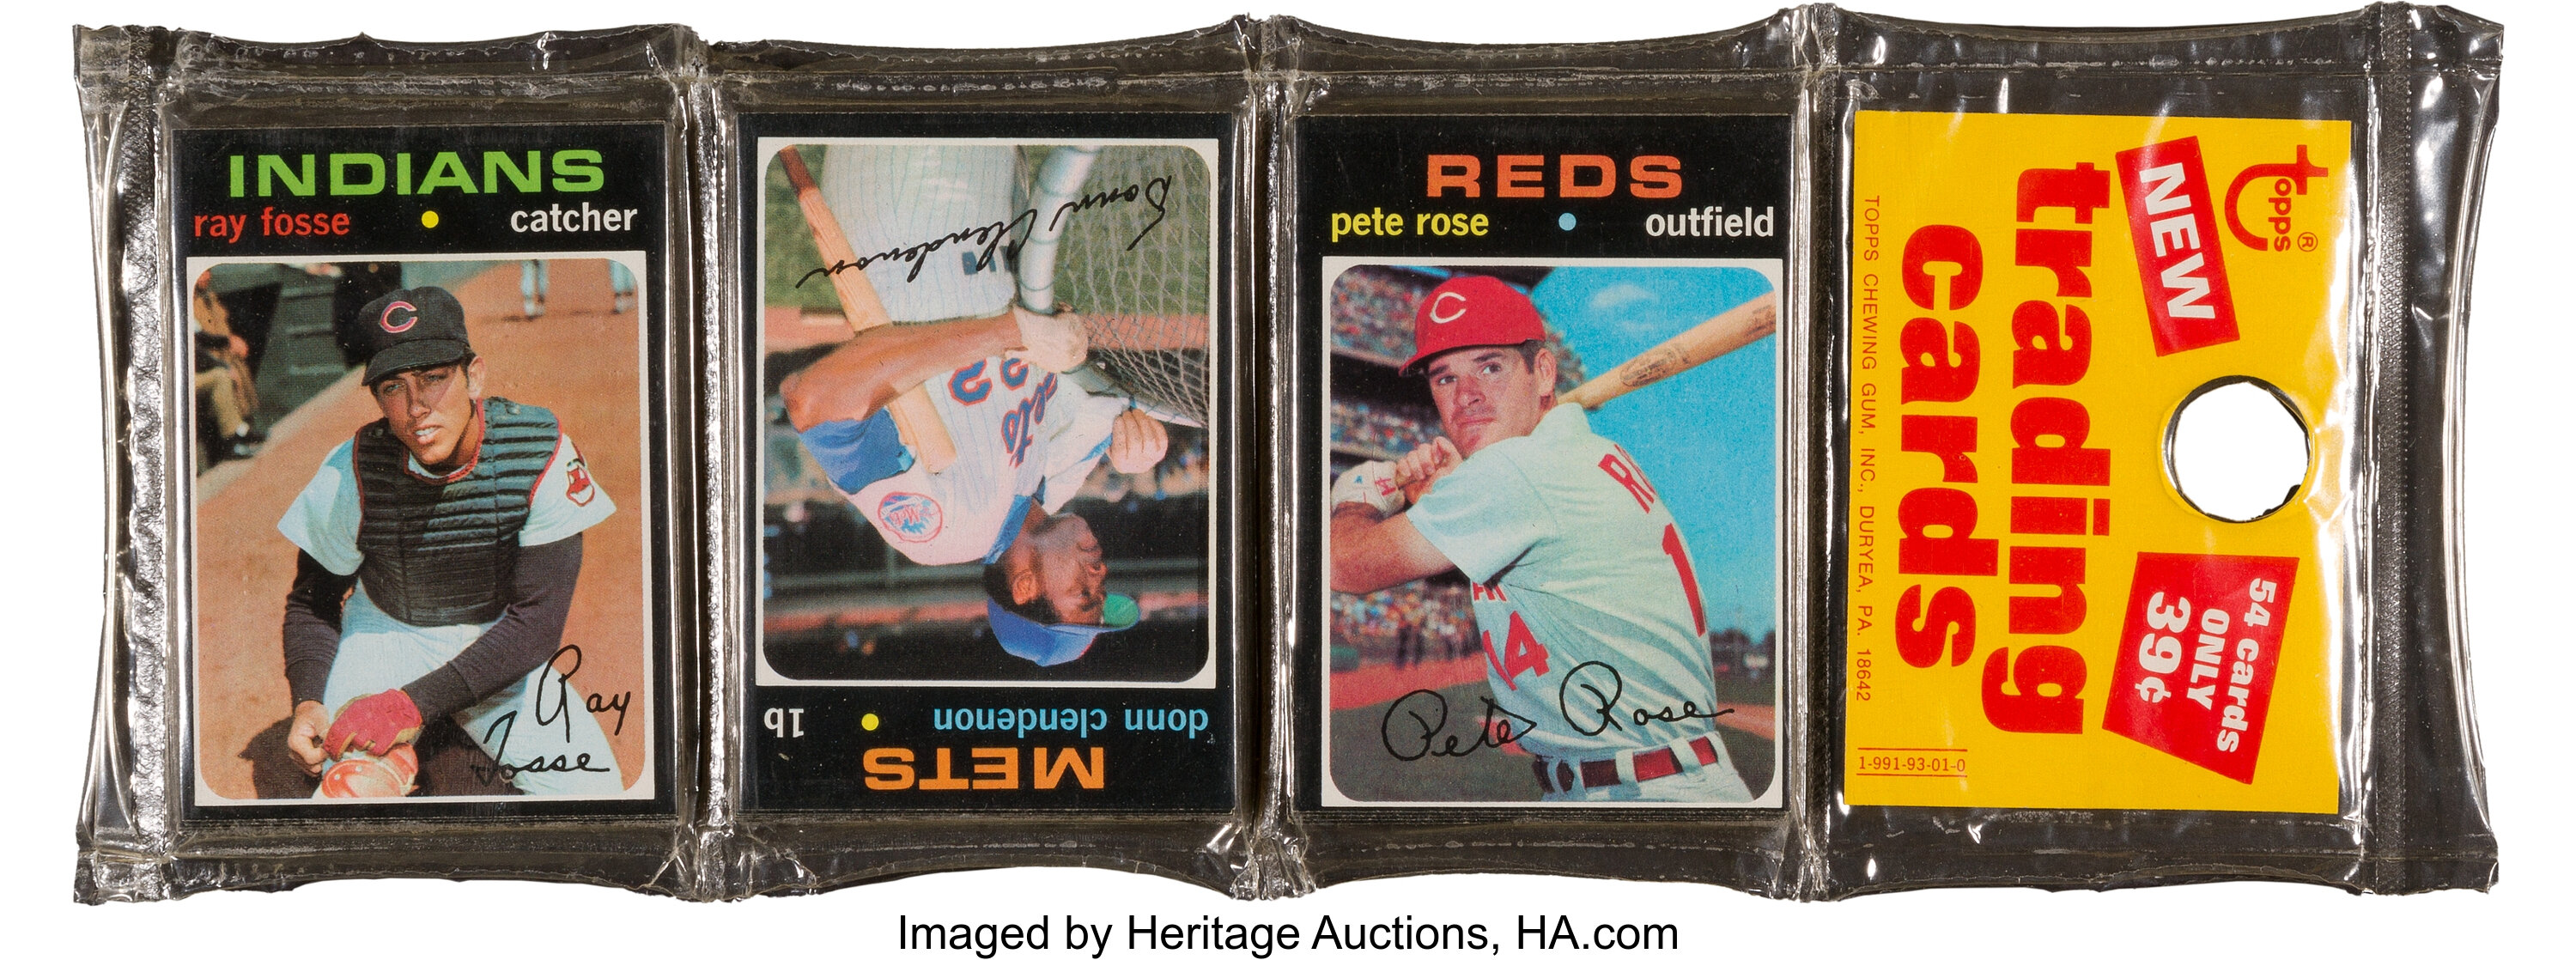 1971 Topps Baseball 1st Series Unopened Rack Pack - Pete Rose on | Lot  #80827 | Heritage Auctions